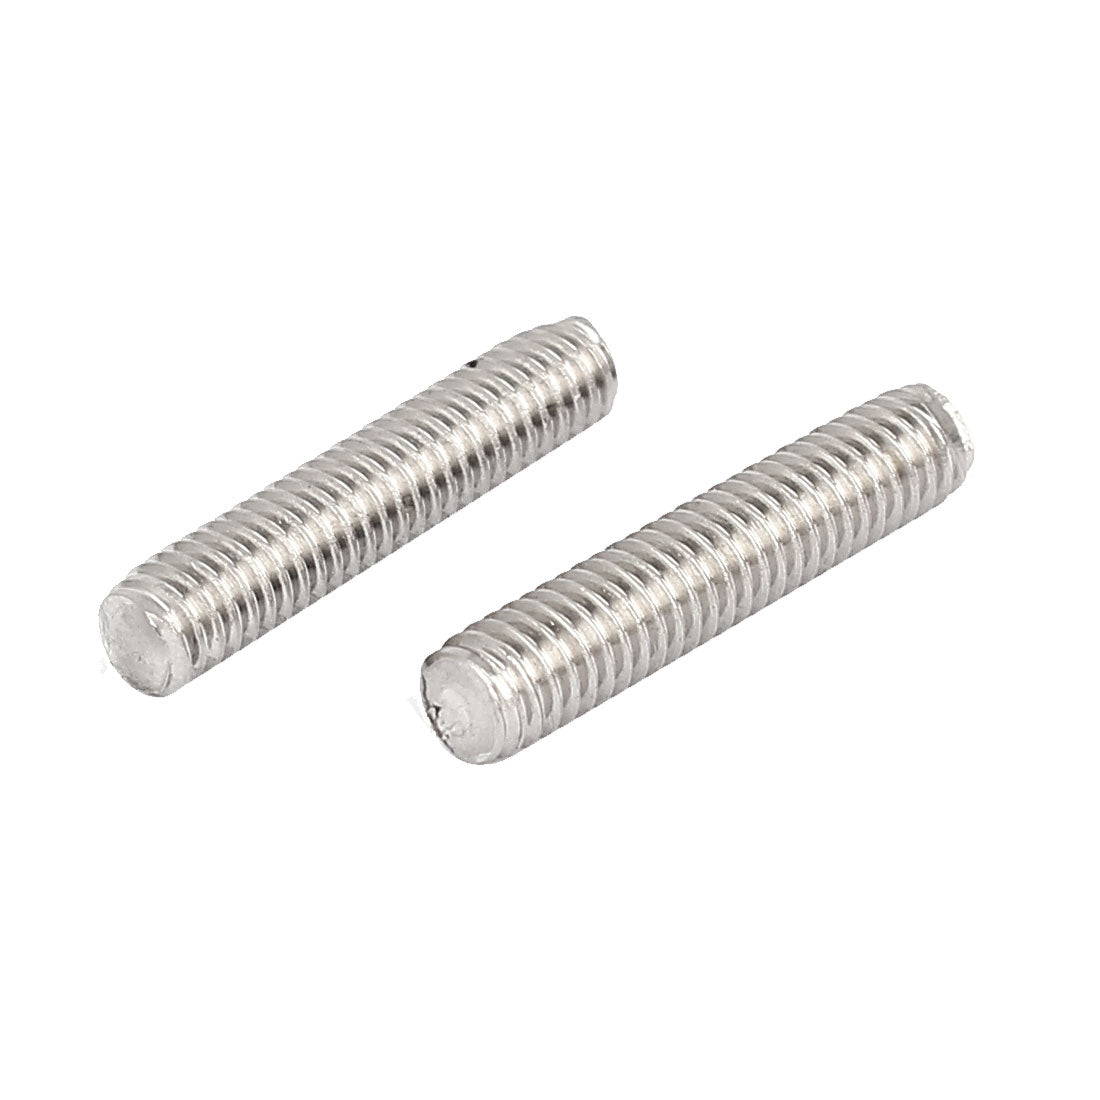 uxcell Uxcell M4 x 20mm 304 Stainless Steel Fully Threaded Rod Bar Studs Silver Tone 50 Pcs